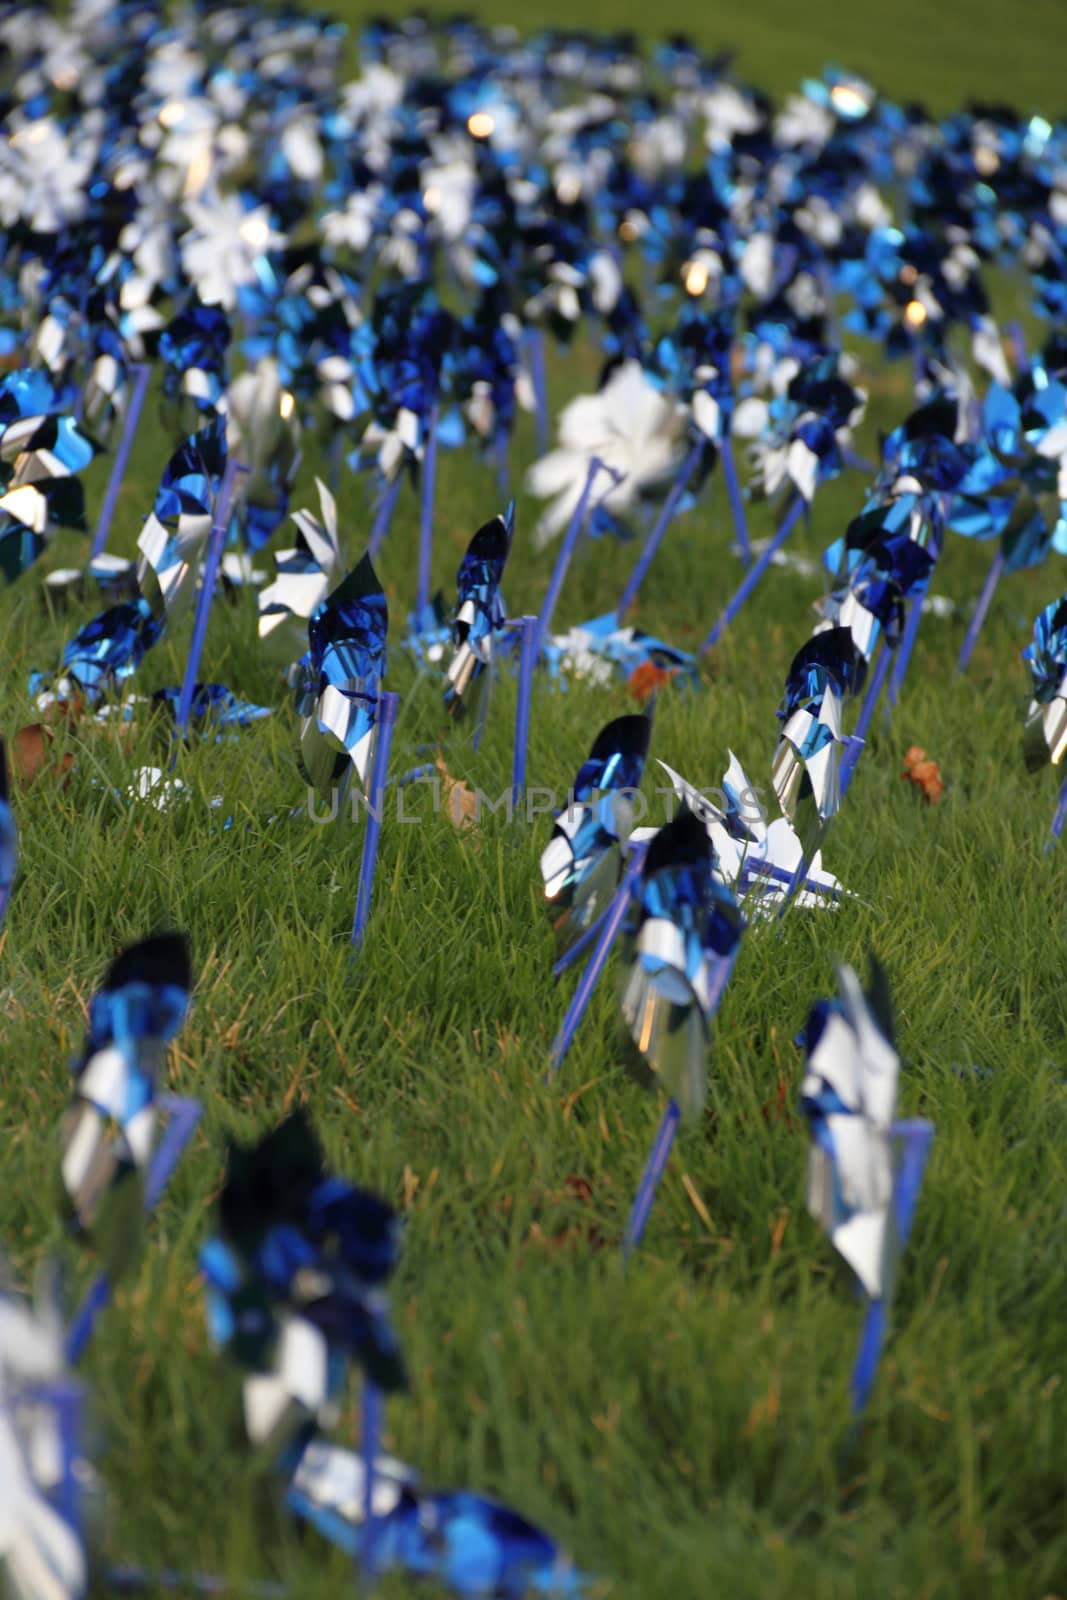 A field full of blue pinwheels spinning in the breeze